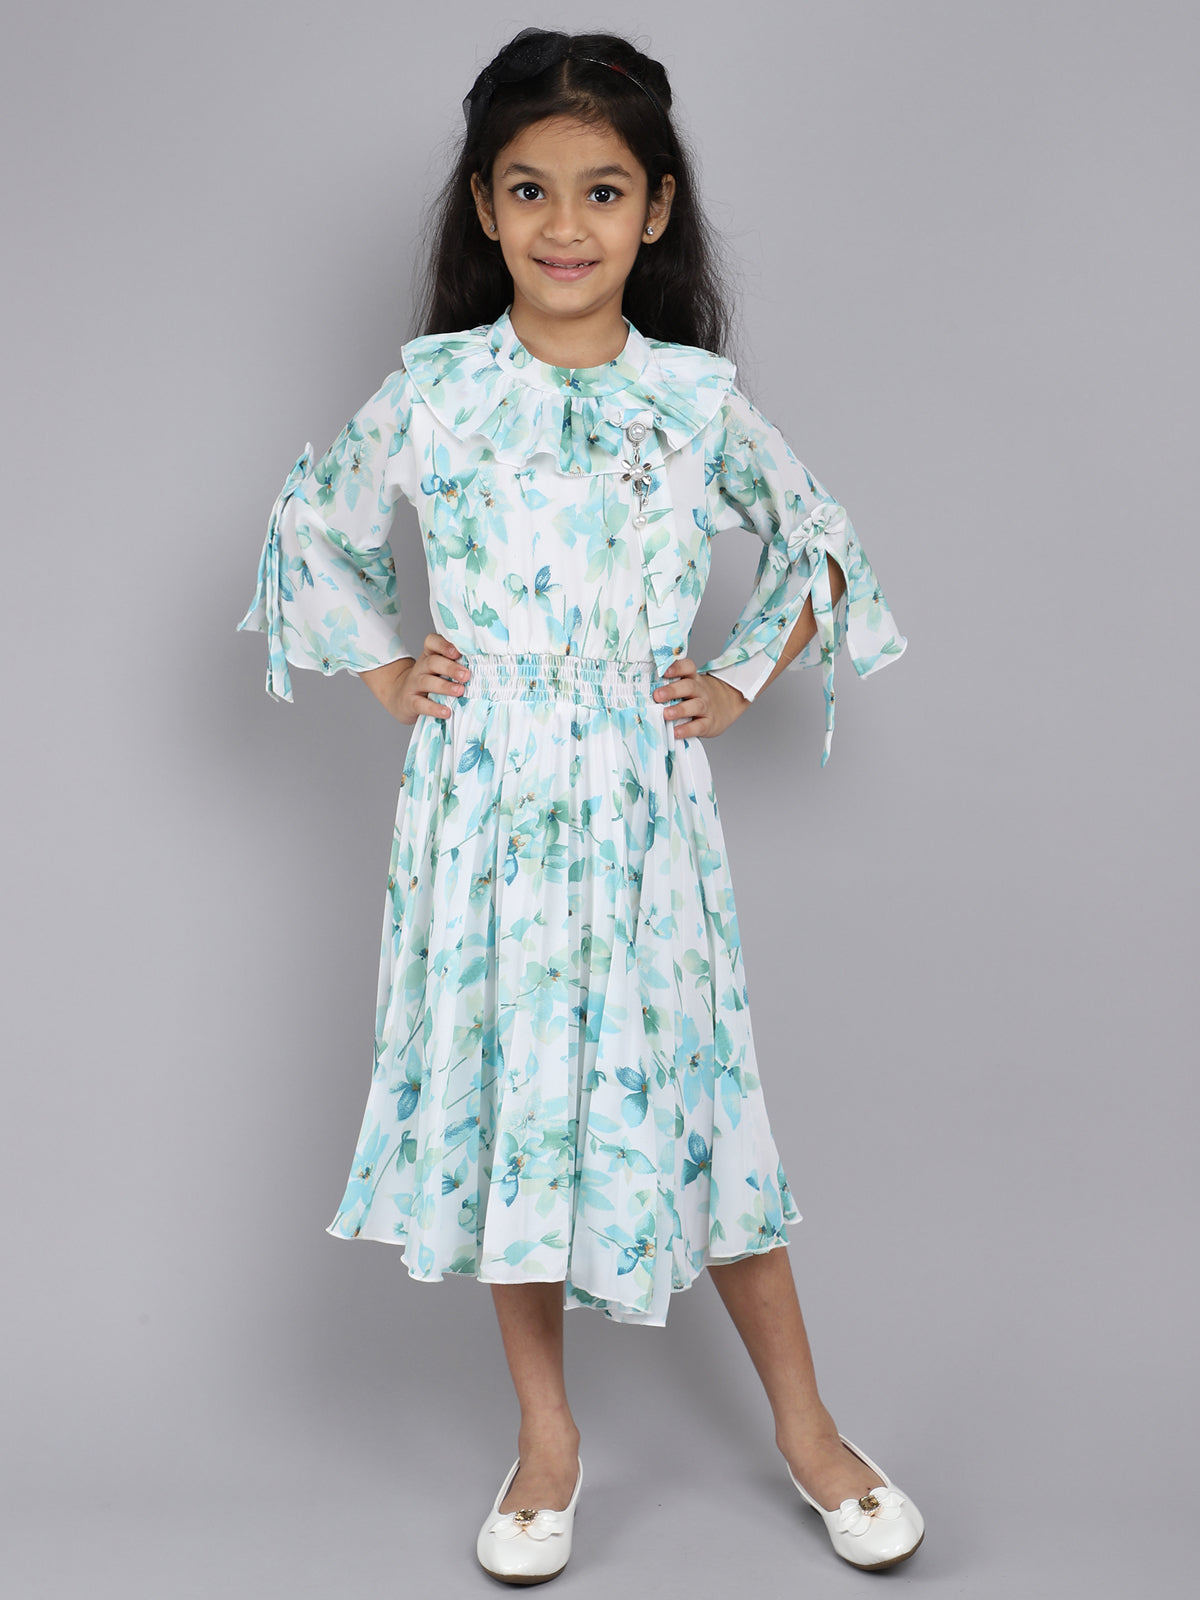 Dress Floral Print with Green Color for kids